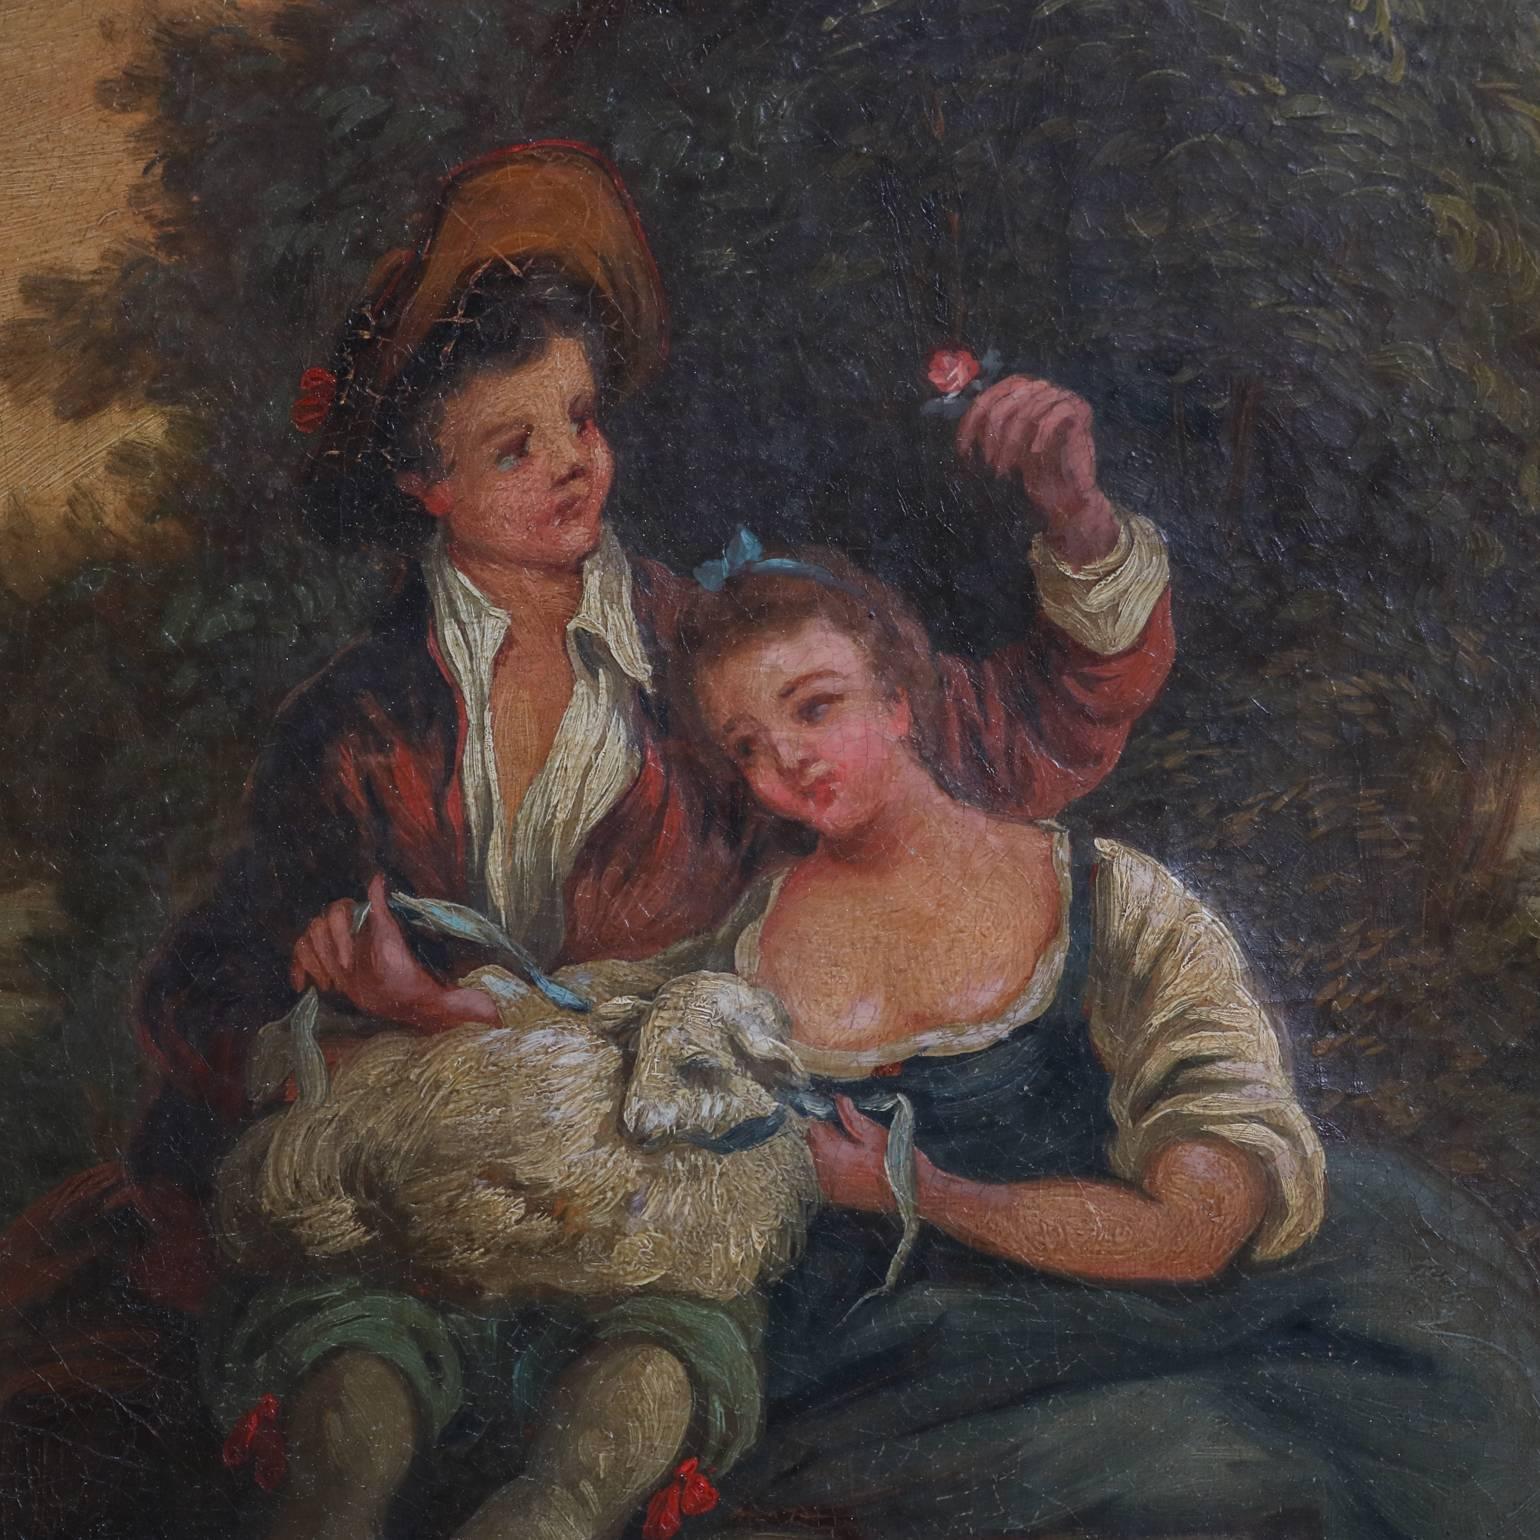 Antique and fine English oil on canvas painting of mountainous and wooded landscape scene with a courting couple and their lamb, giltwood surround, circa 1880

Measures : 26" H x 29" W x 2" D, framed: 18"H x 22" D.

